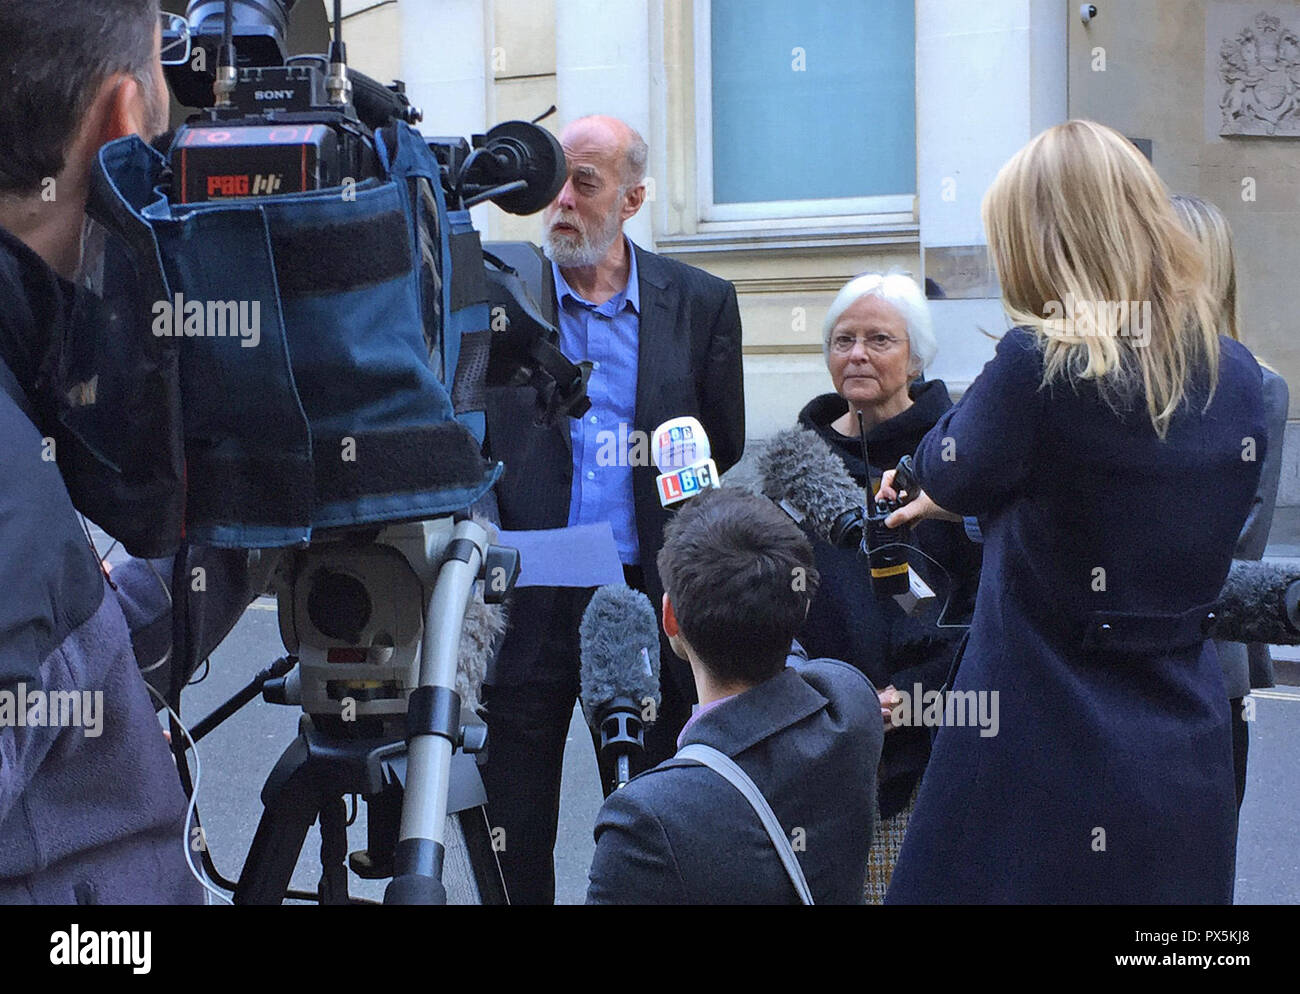 Thomas Orchard's father Ken and mother Alison Orchard speak to the media outside Bristol Crown Court after Devon and Cornwall Police pleaded guilty to health and safety breaches following the death of their son, who died in custody in October 2012. Stock Photo